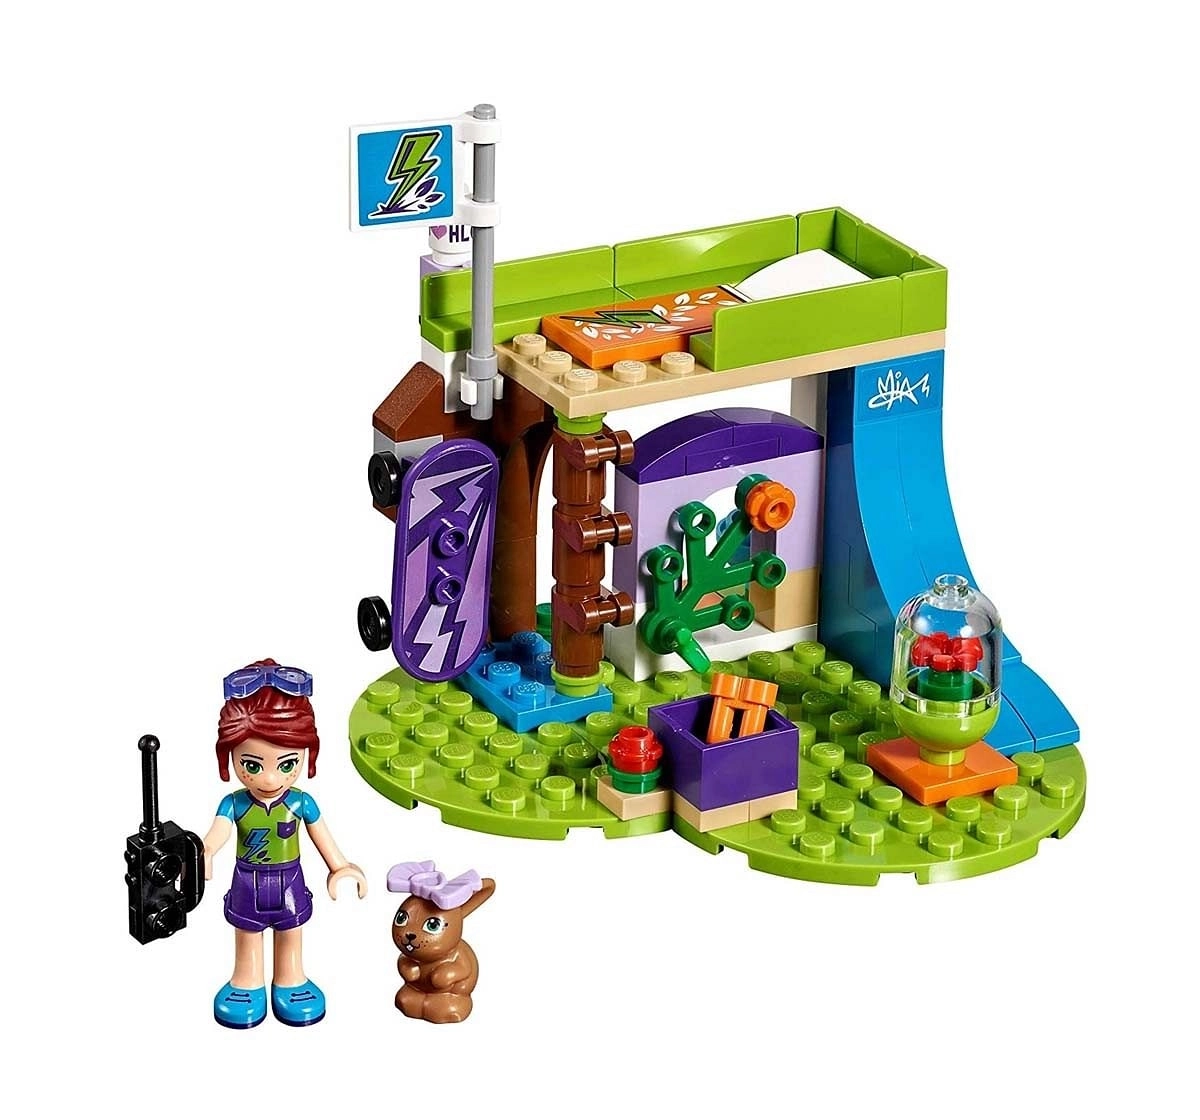 Lego Friends Mia’s Bedroom Building  With Tree House (86 Pcs)41327  Blocks for age 6Y+ 